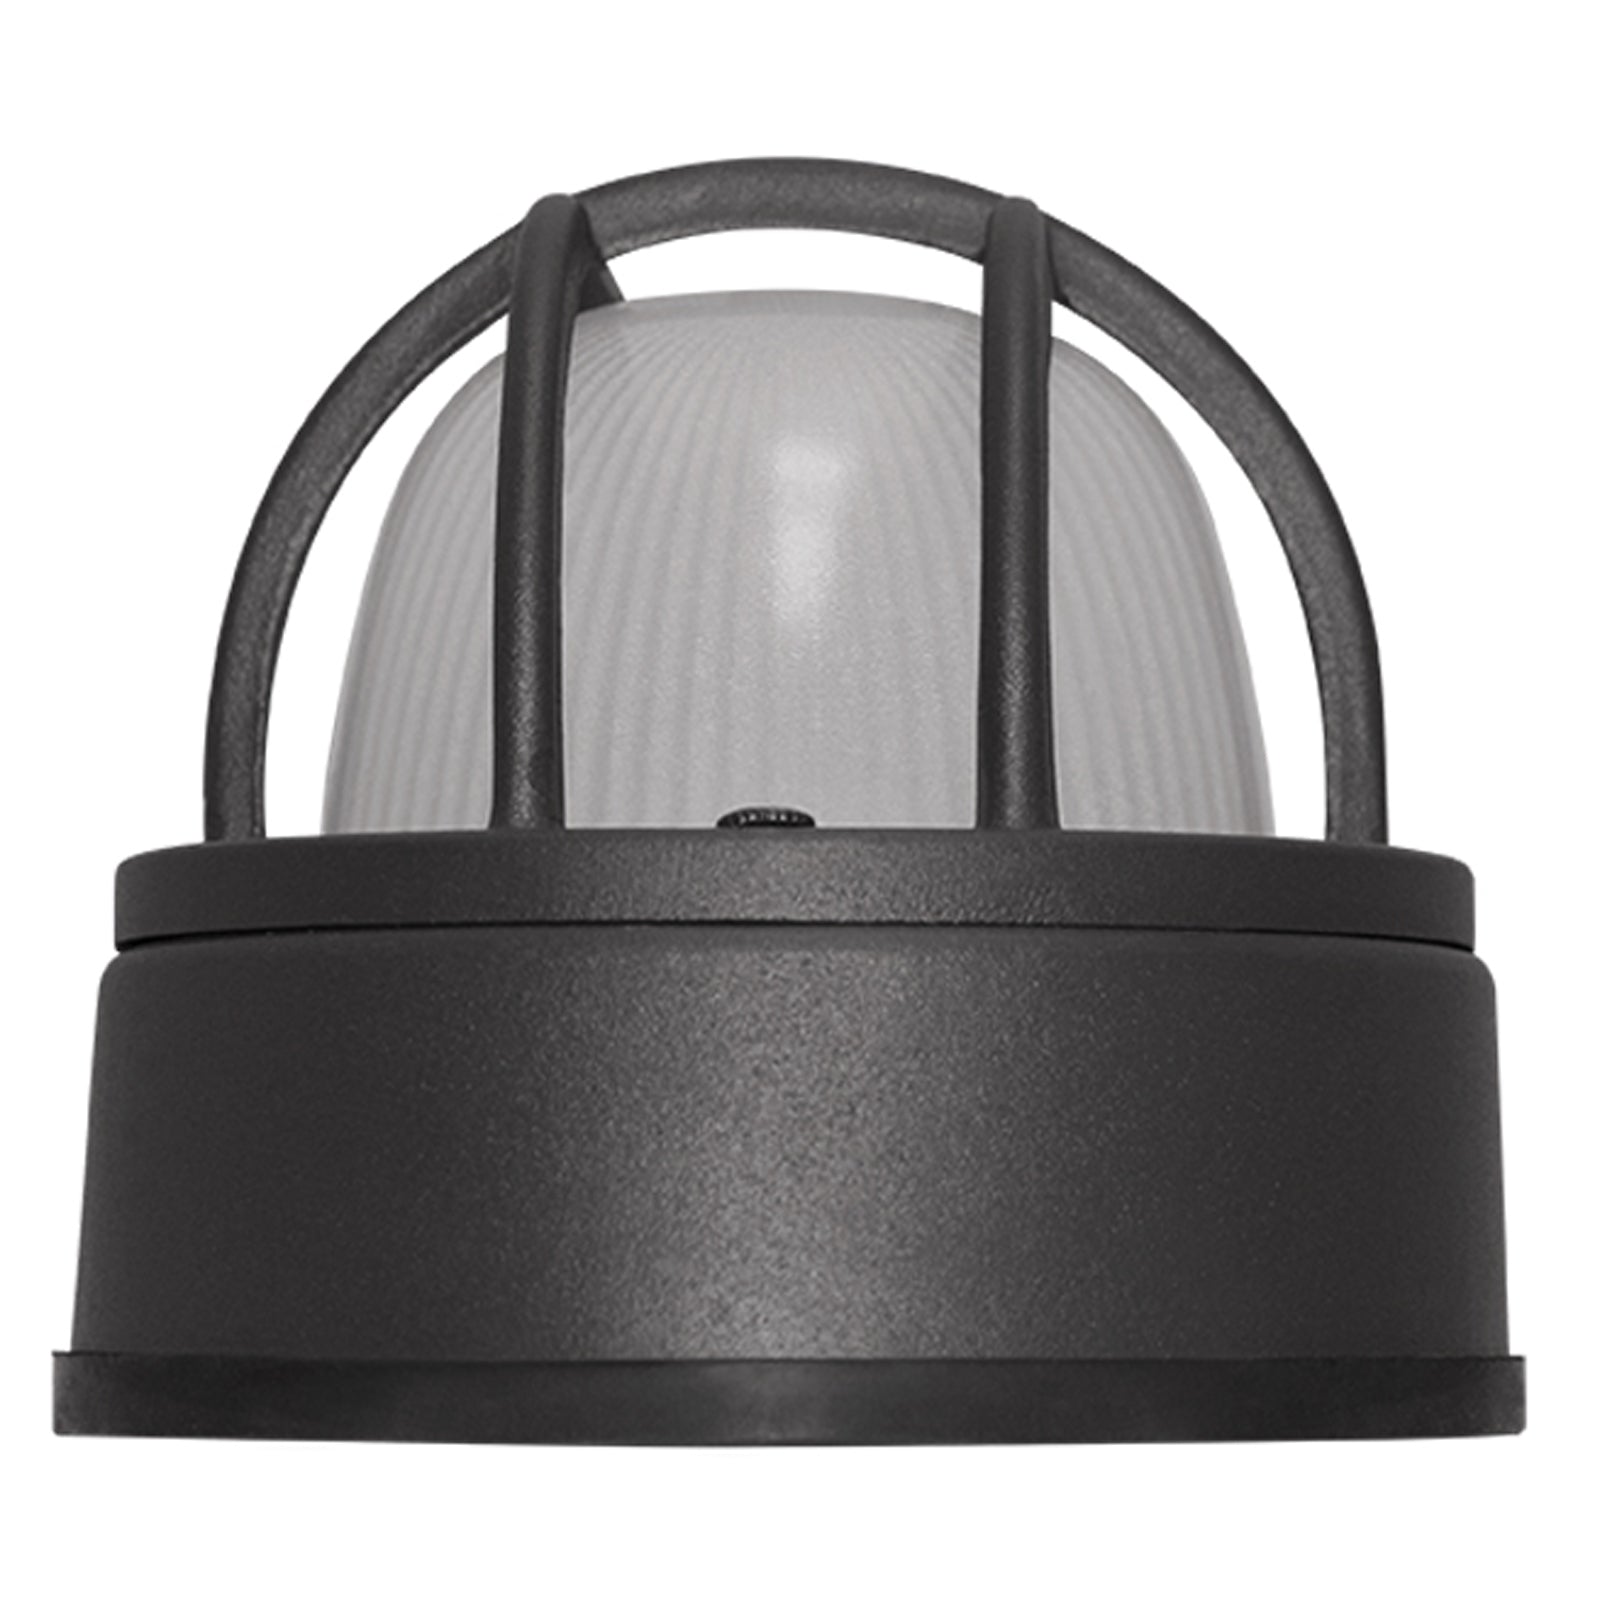 Versatile Outdoor Lighting Fixture with Grid Encasing and Oval Shape